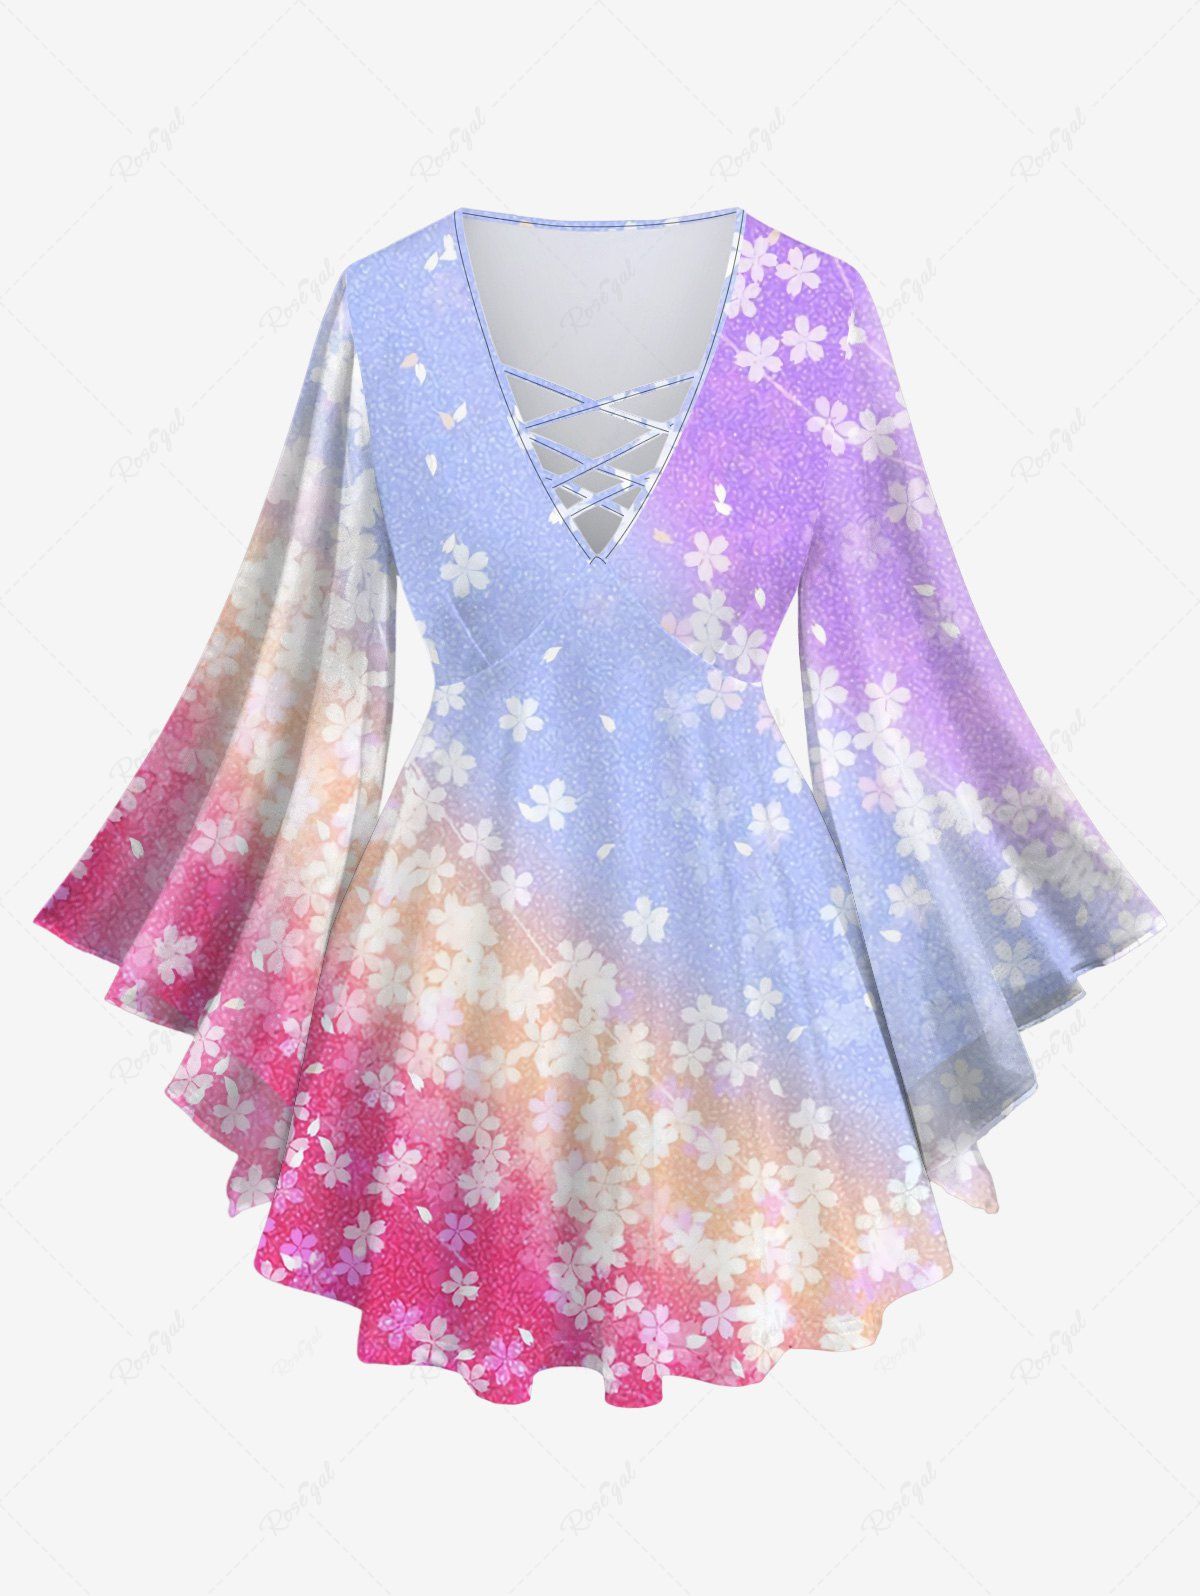 Sale Plus Size Flare Sleeves Floral Ombre Striped Colorblock Print Lattice Top  